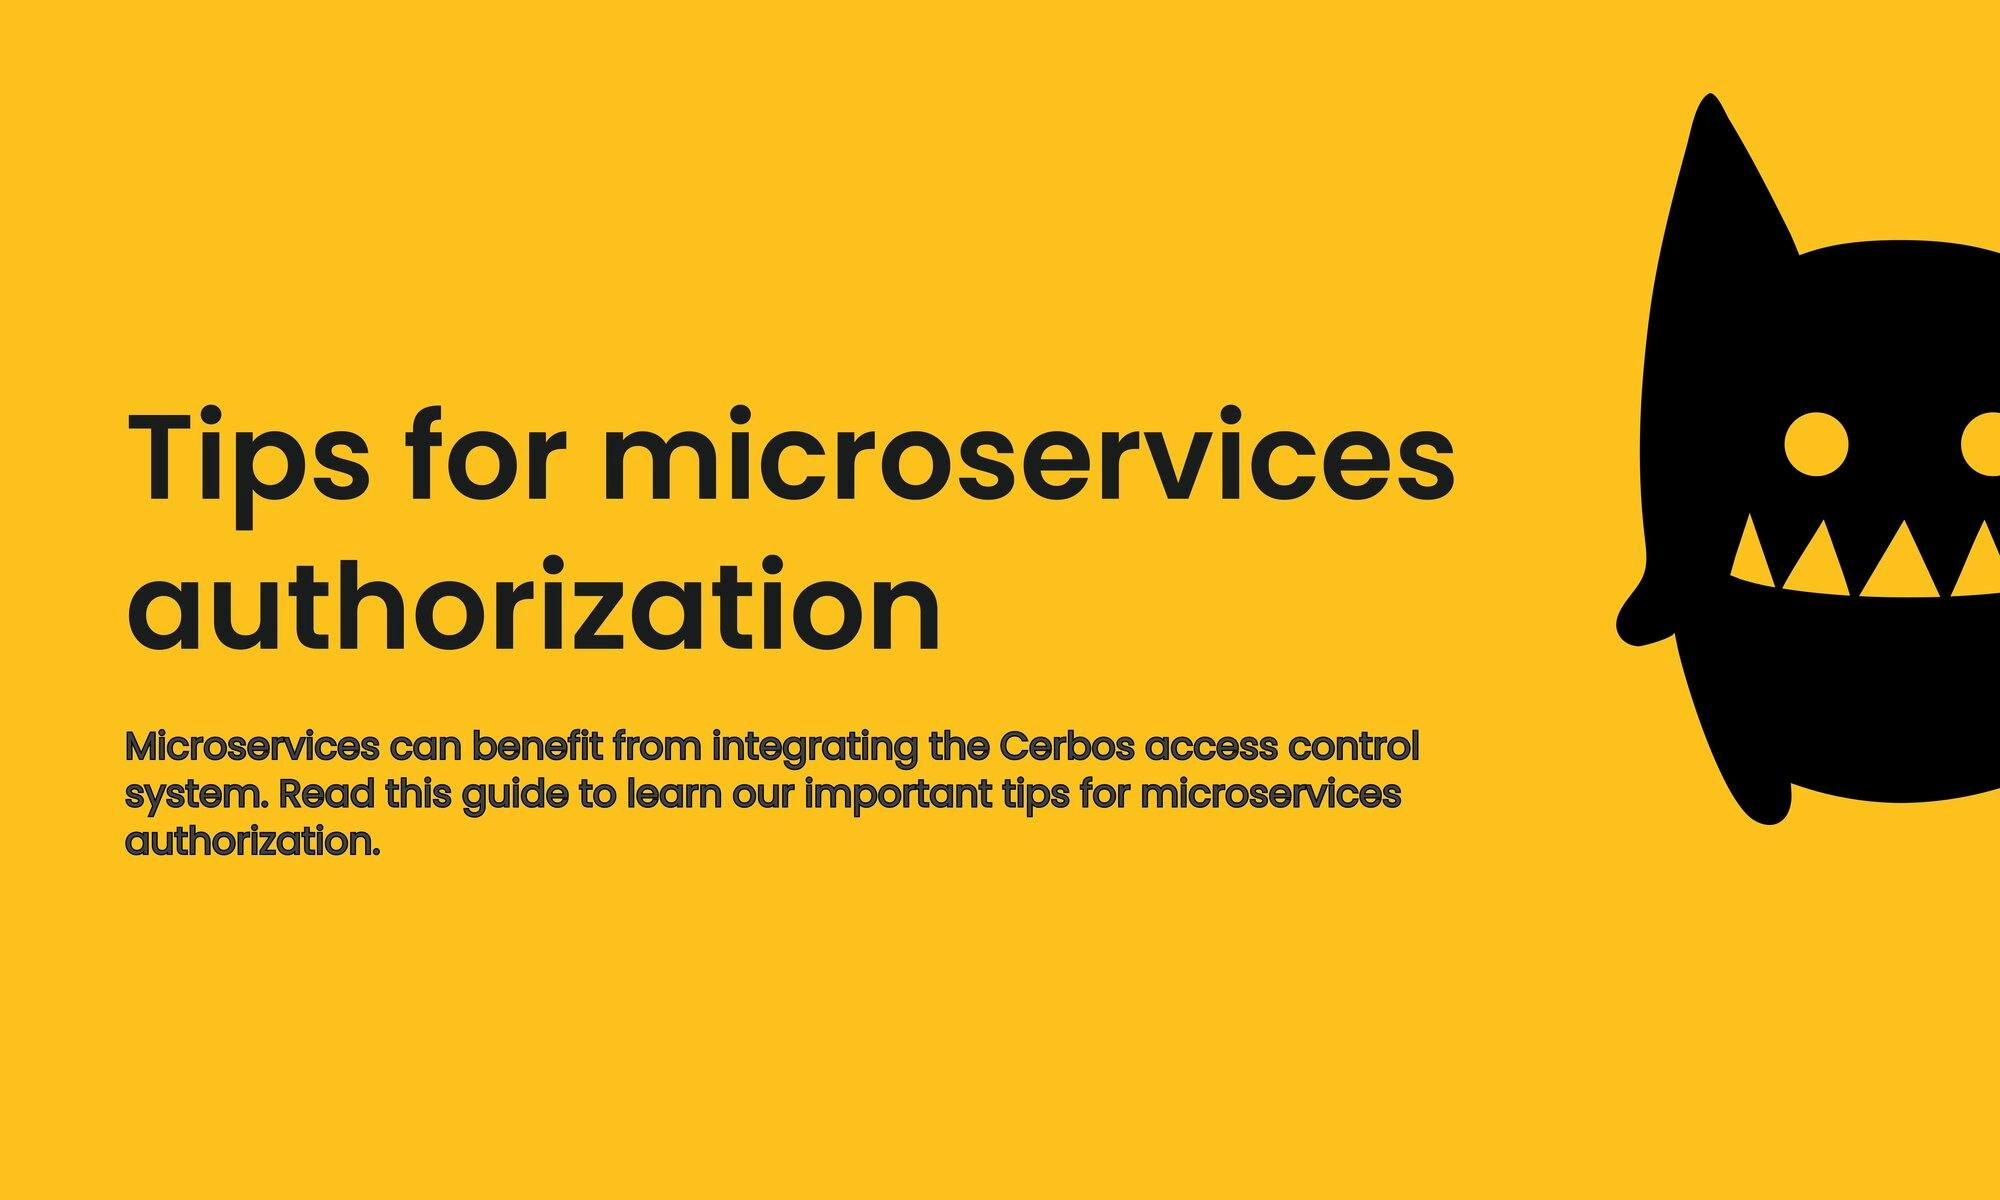 Important tips for microservices authorization 